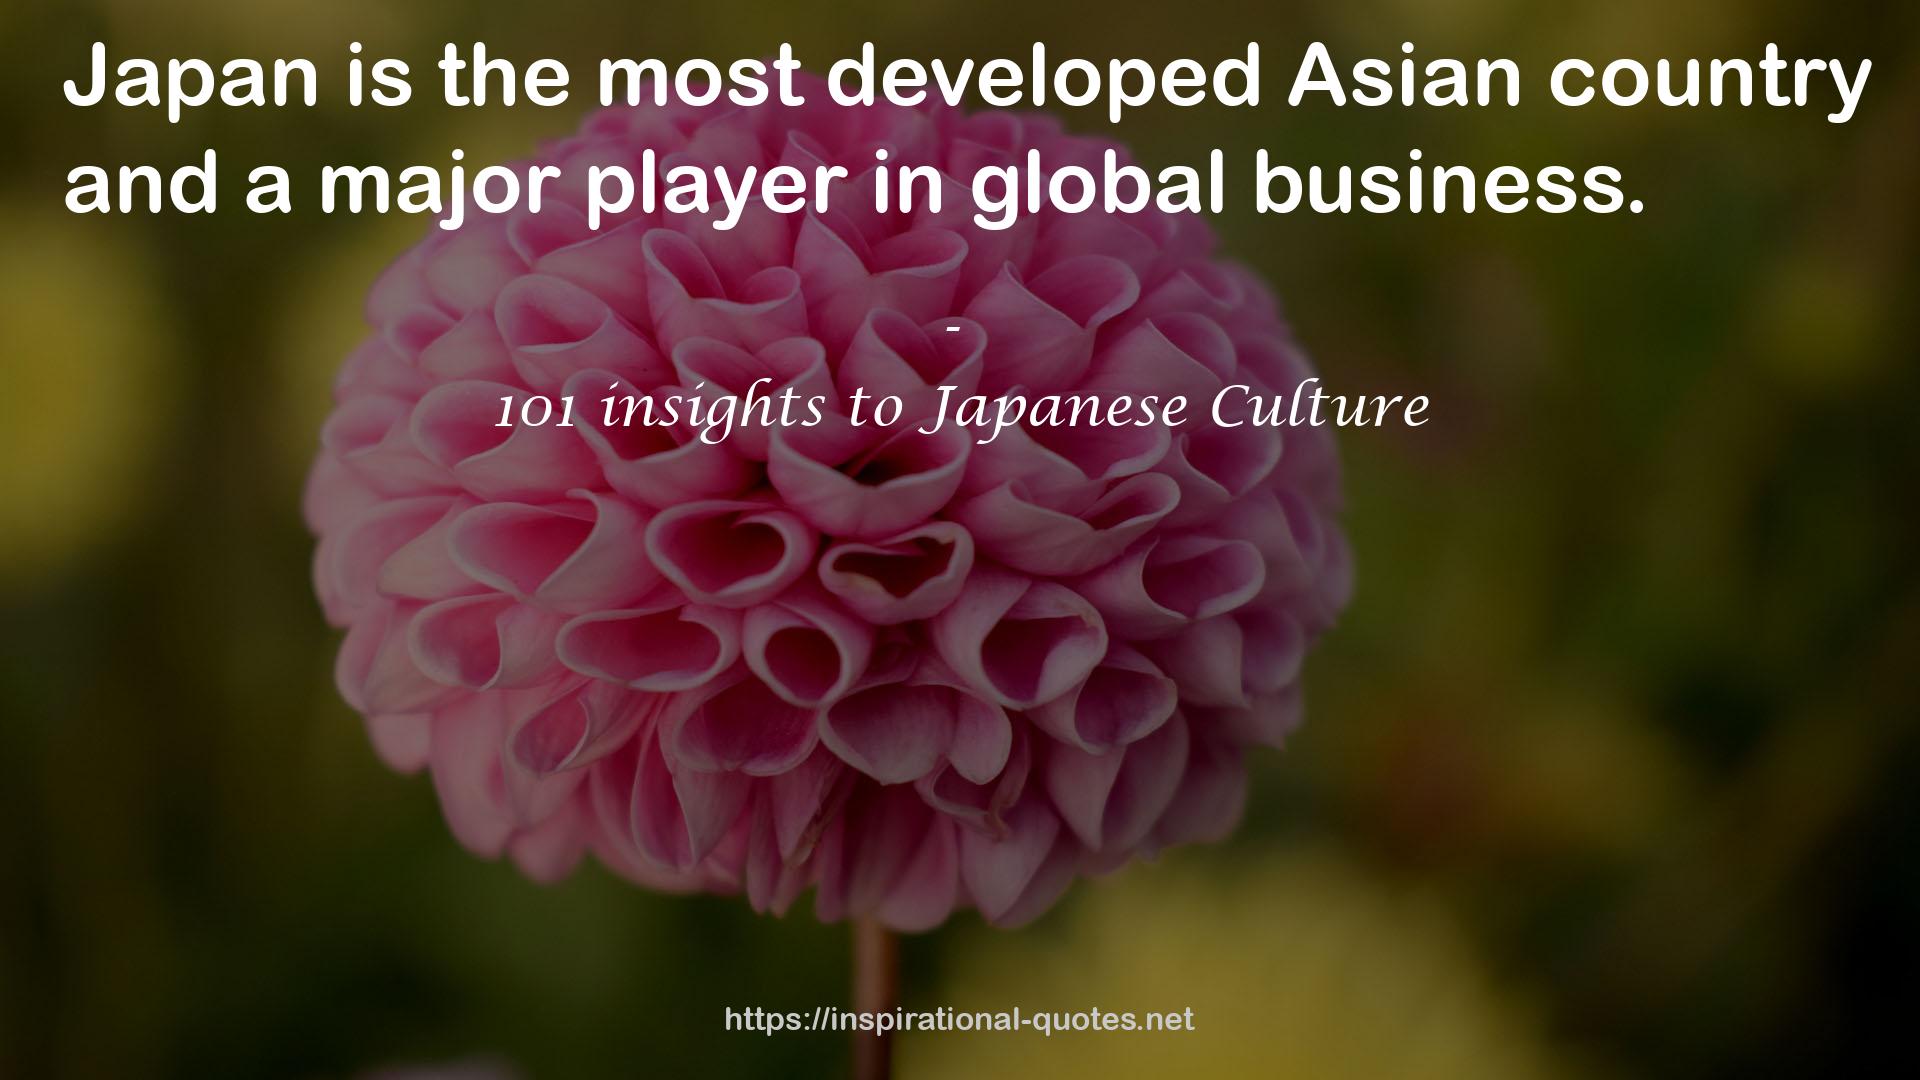 101 insights to Japanese Culture QUOTES